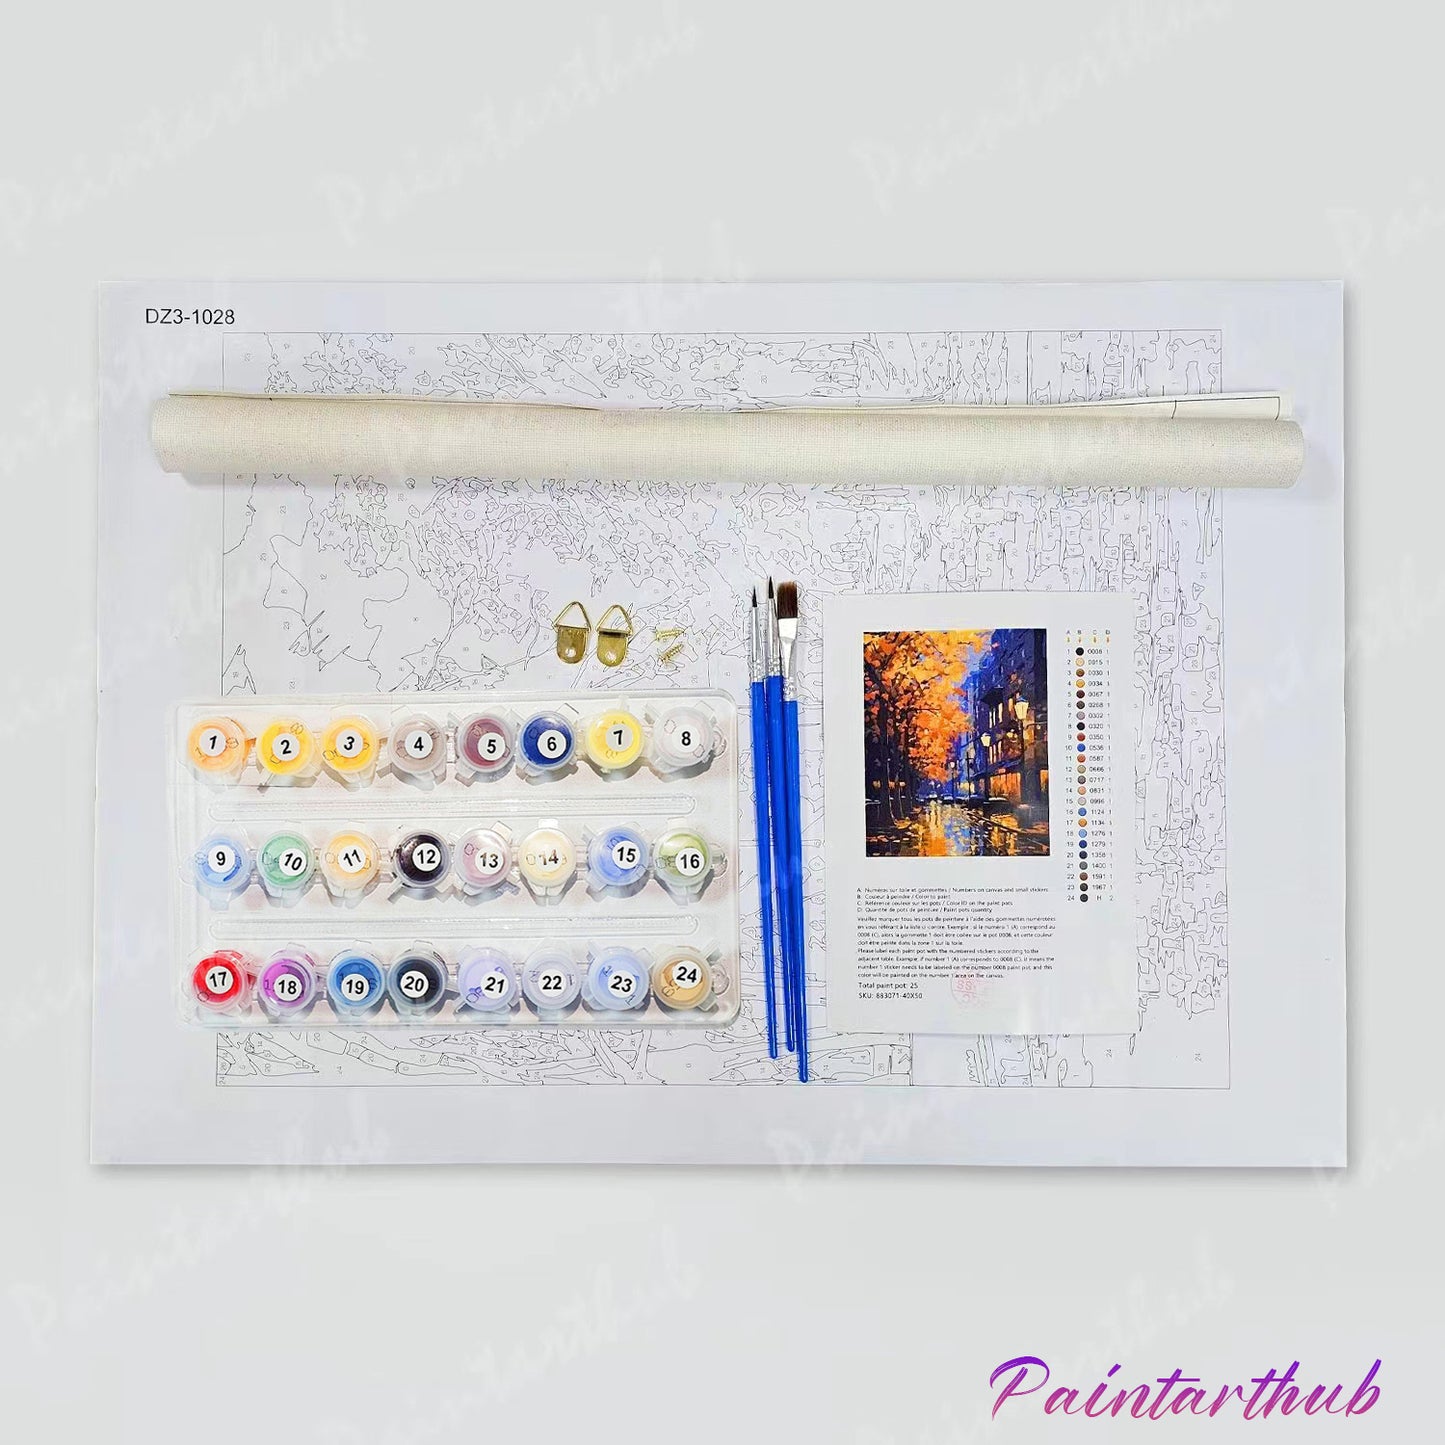 Personalized Custom Paint By Numbers Kit - Upload Your Favorite Photo